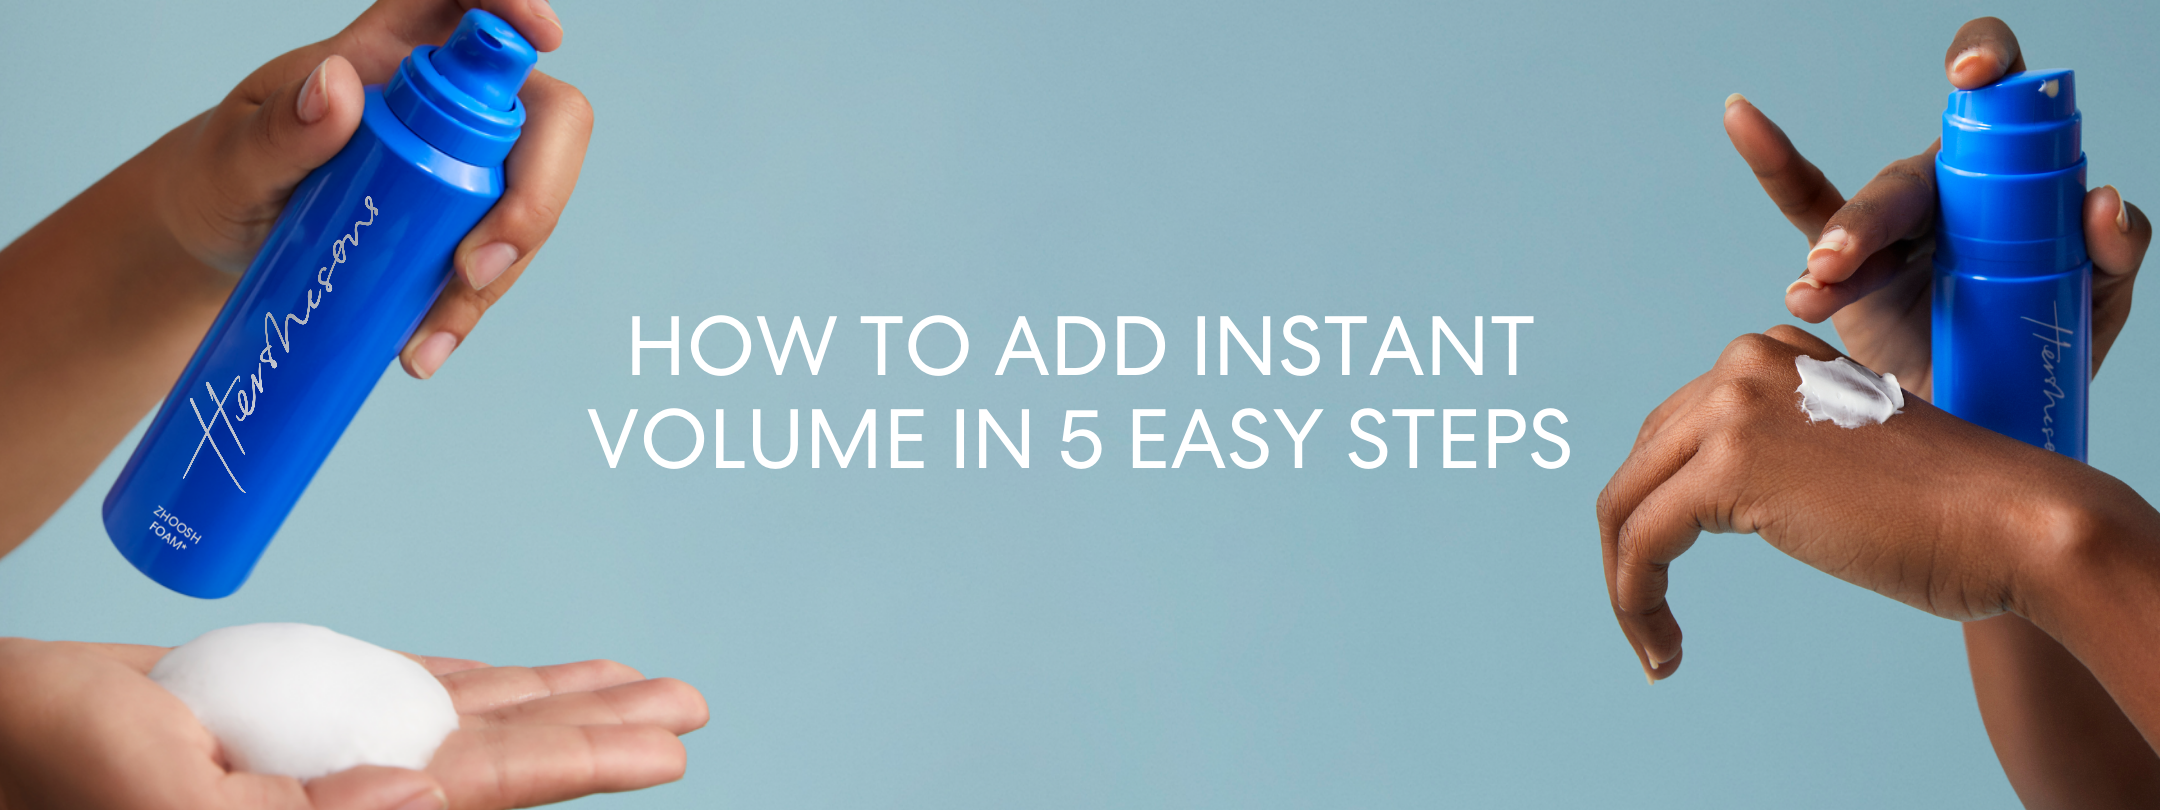 HOW TO ADD INSTANT VOLUME IN 5 EASY STEPS